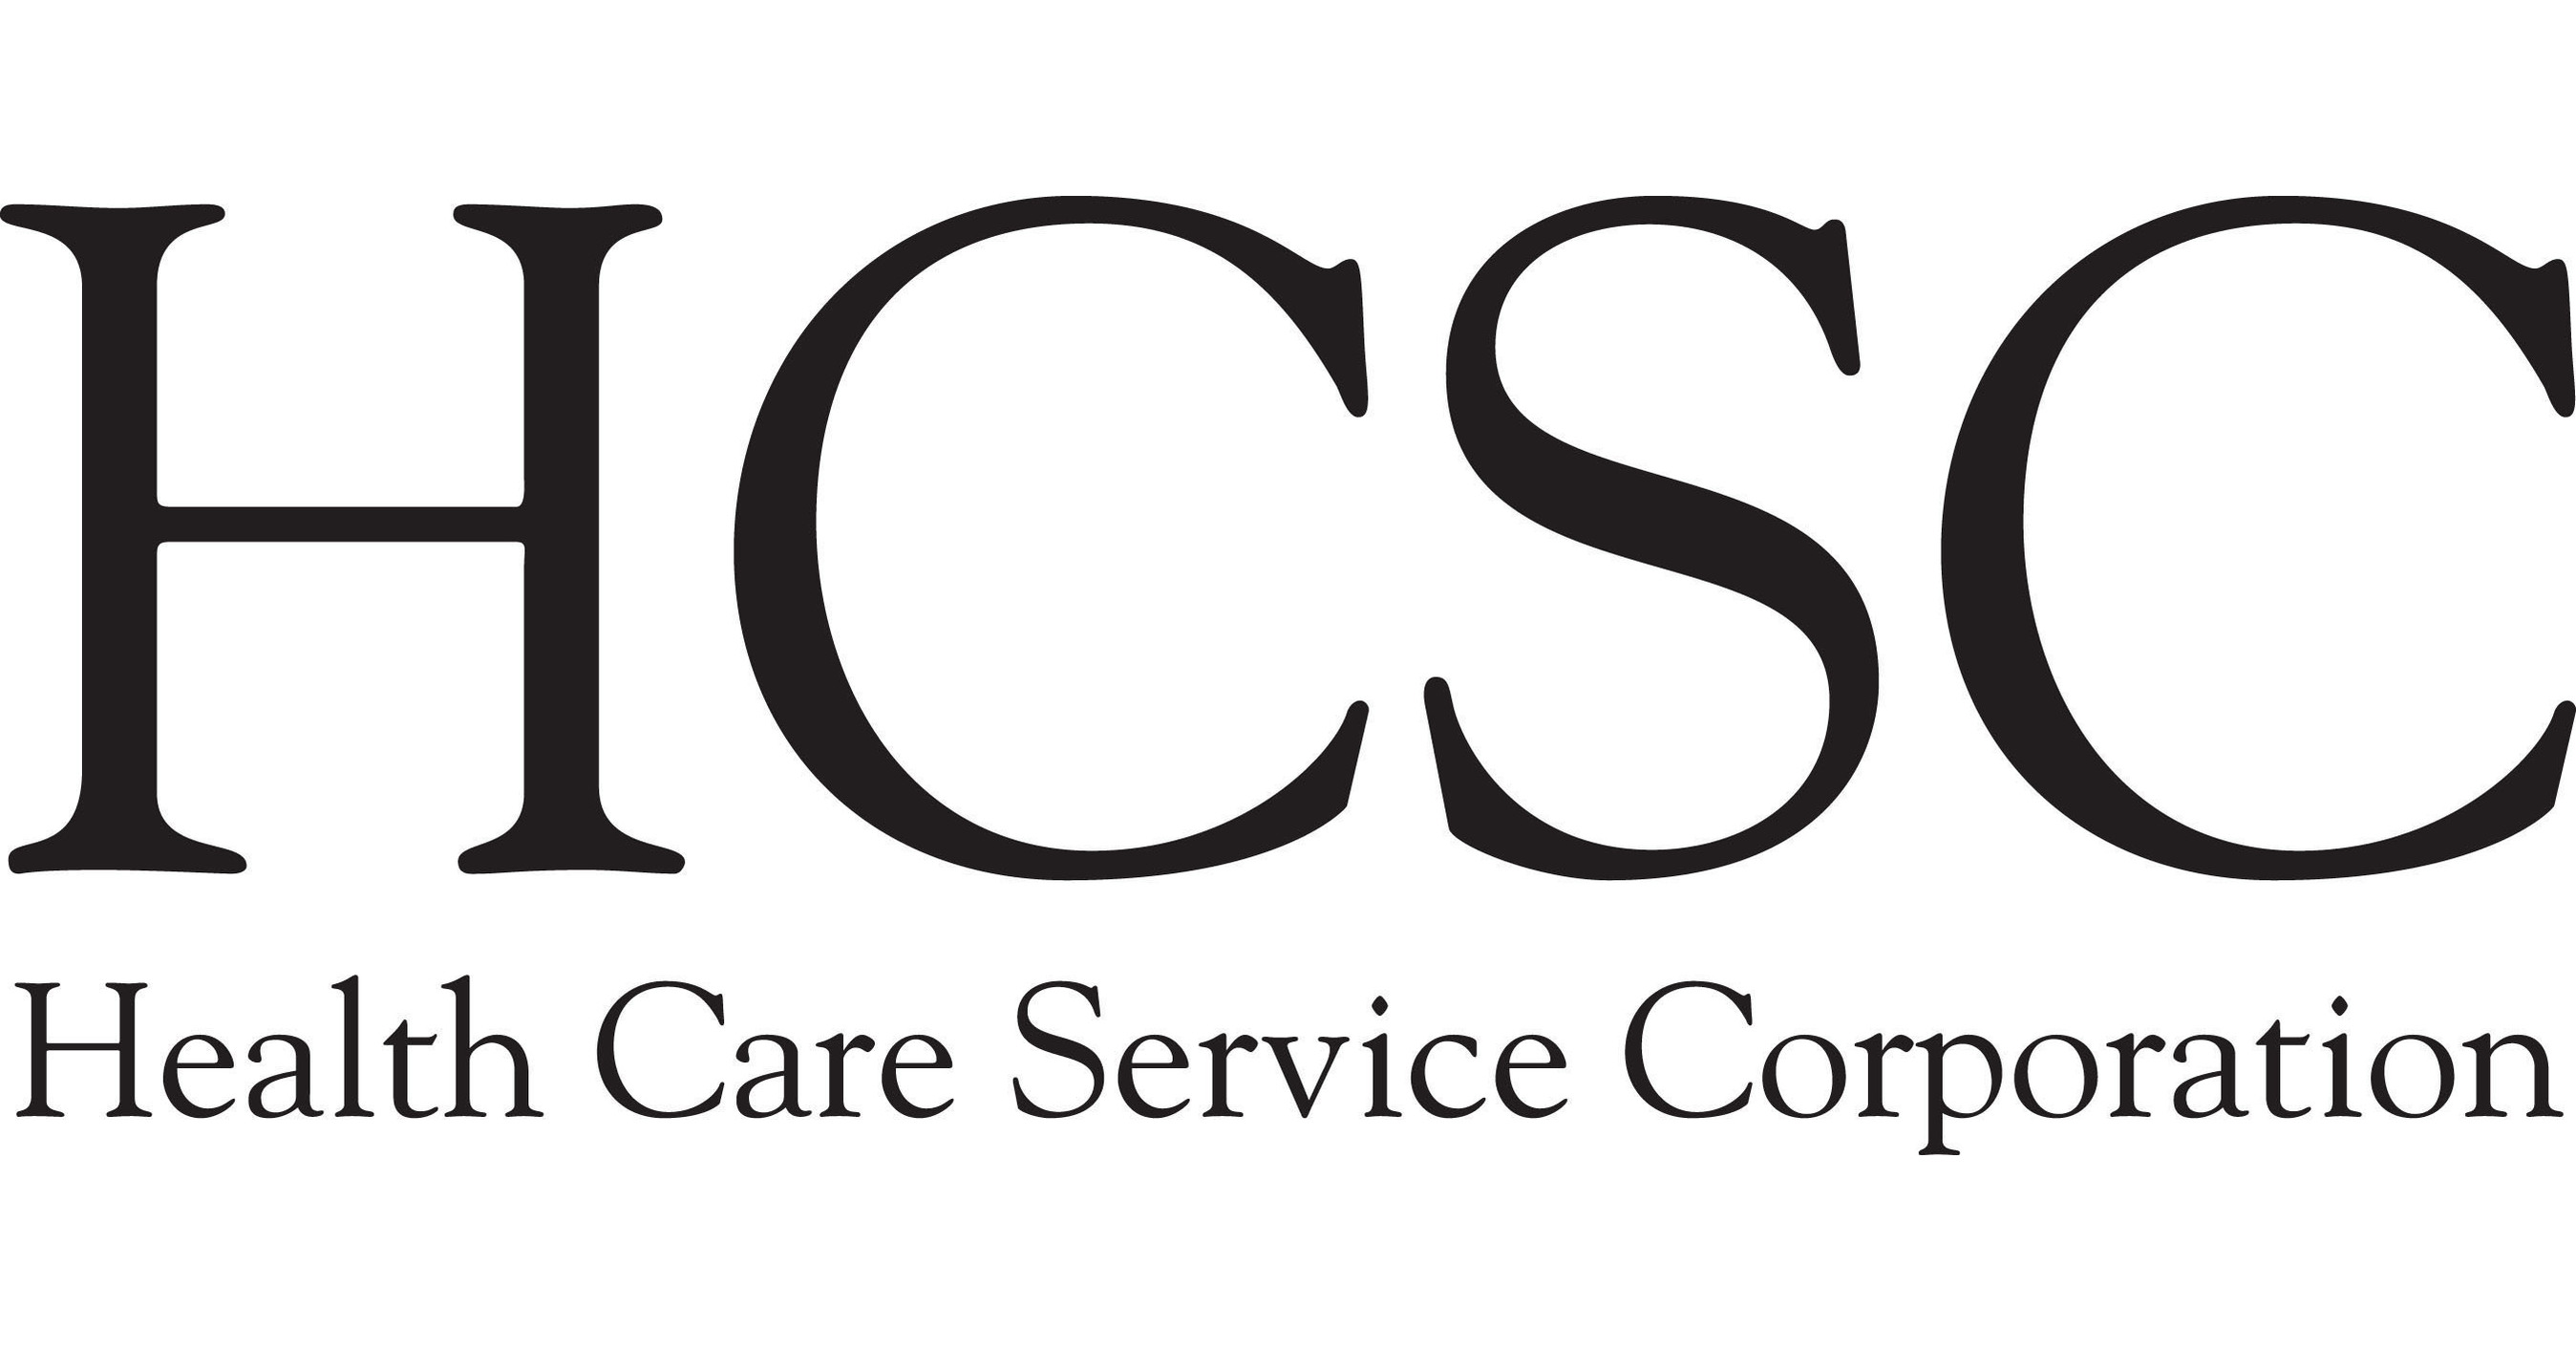 Health Care Service Corporation Named A Best Place to Work for LGBT